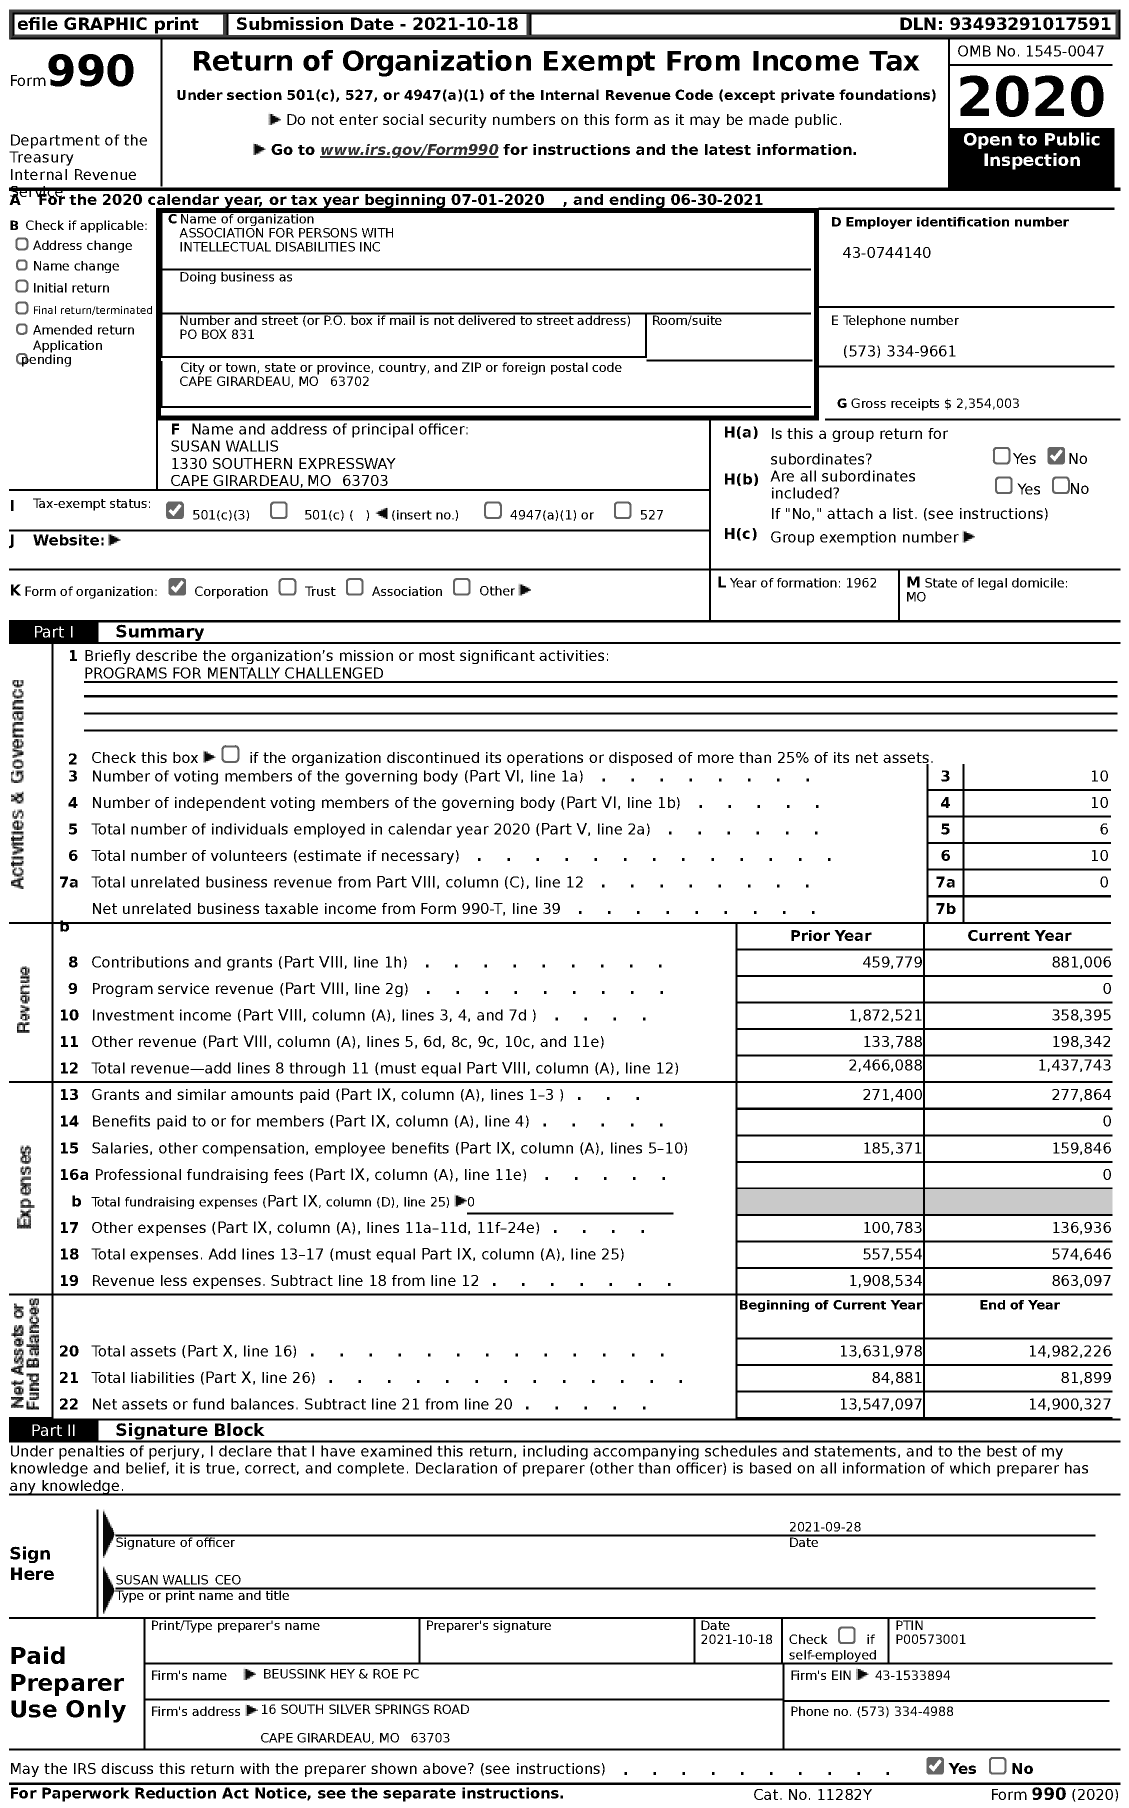 Image of first page of 2020 Form 990 for Association for Persons with Intellectual Disabilities